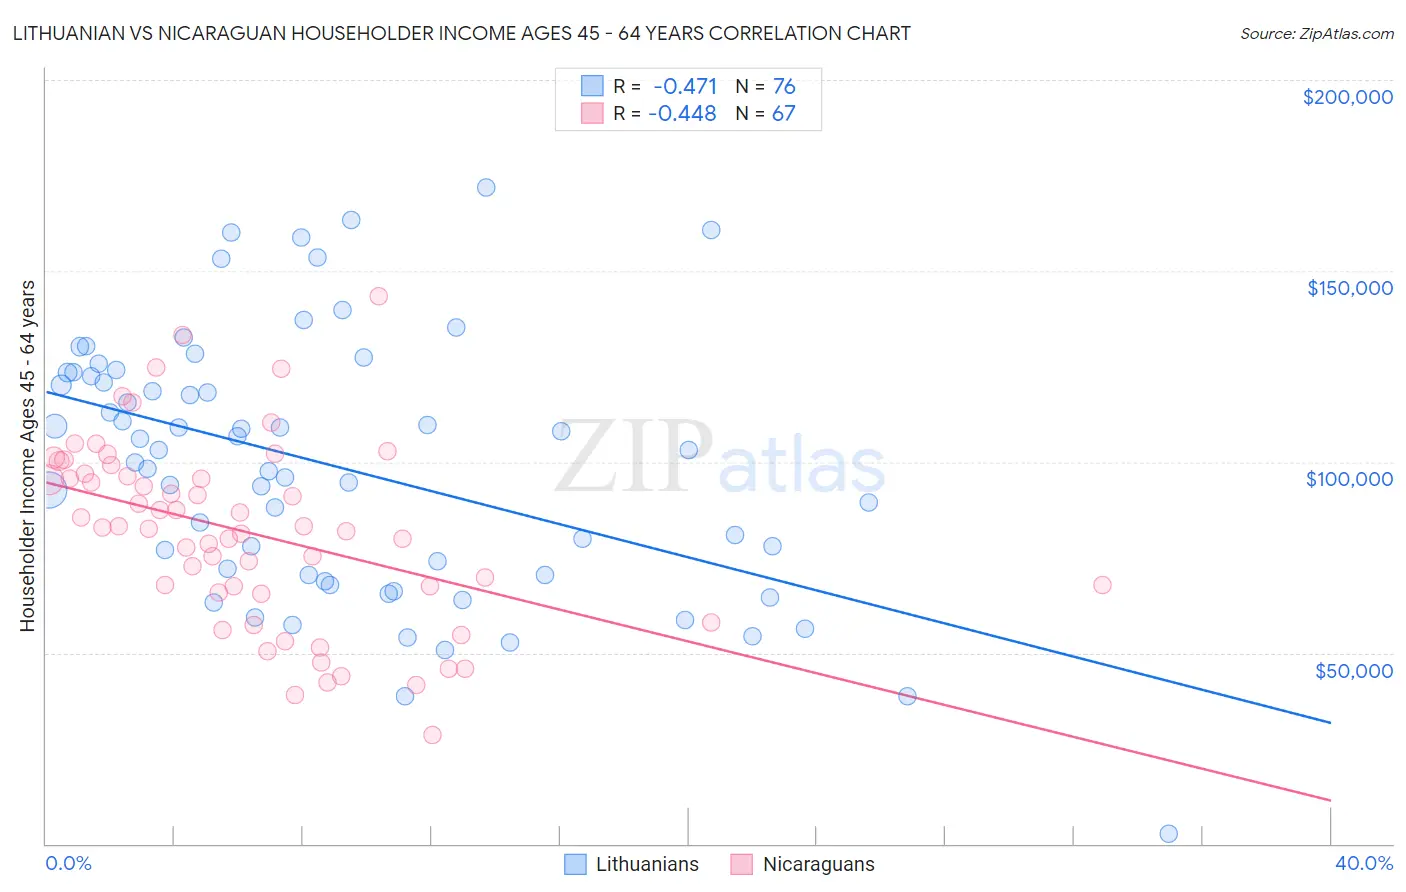 Lithuanian vs Nicaraguan Householder Income Ages 45 - 64 years